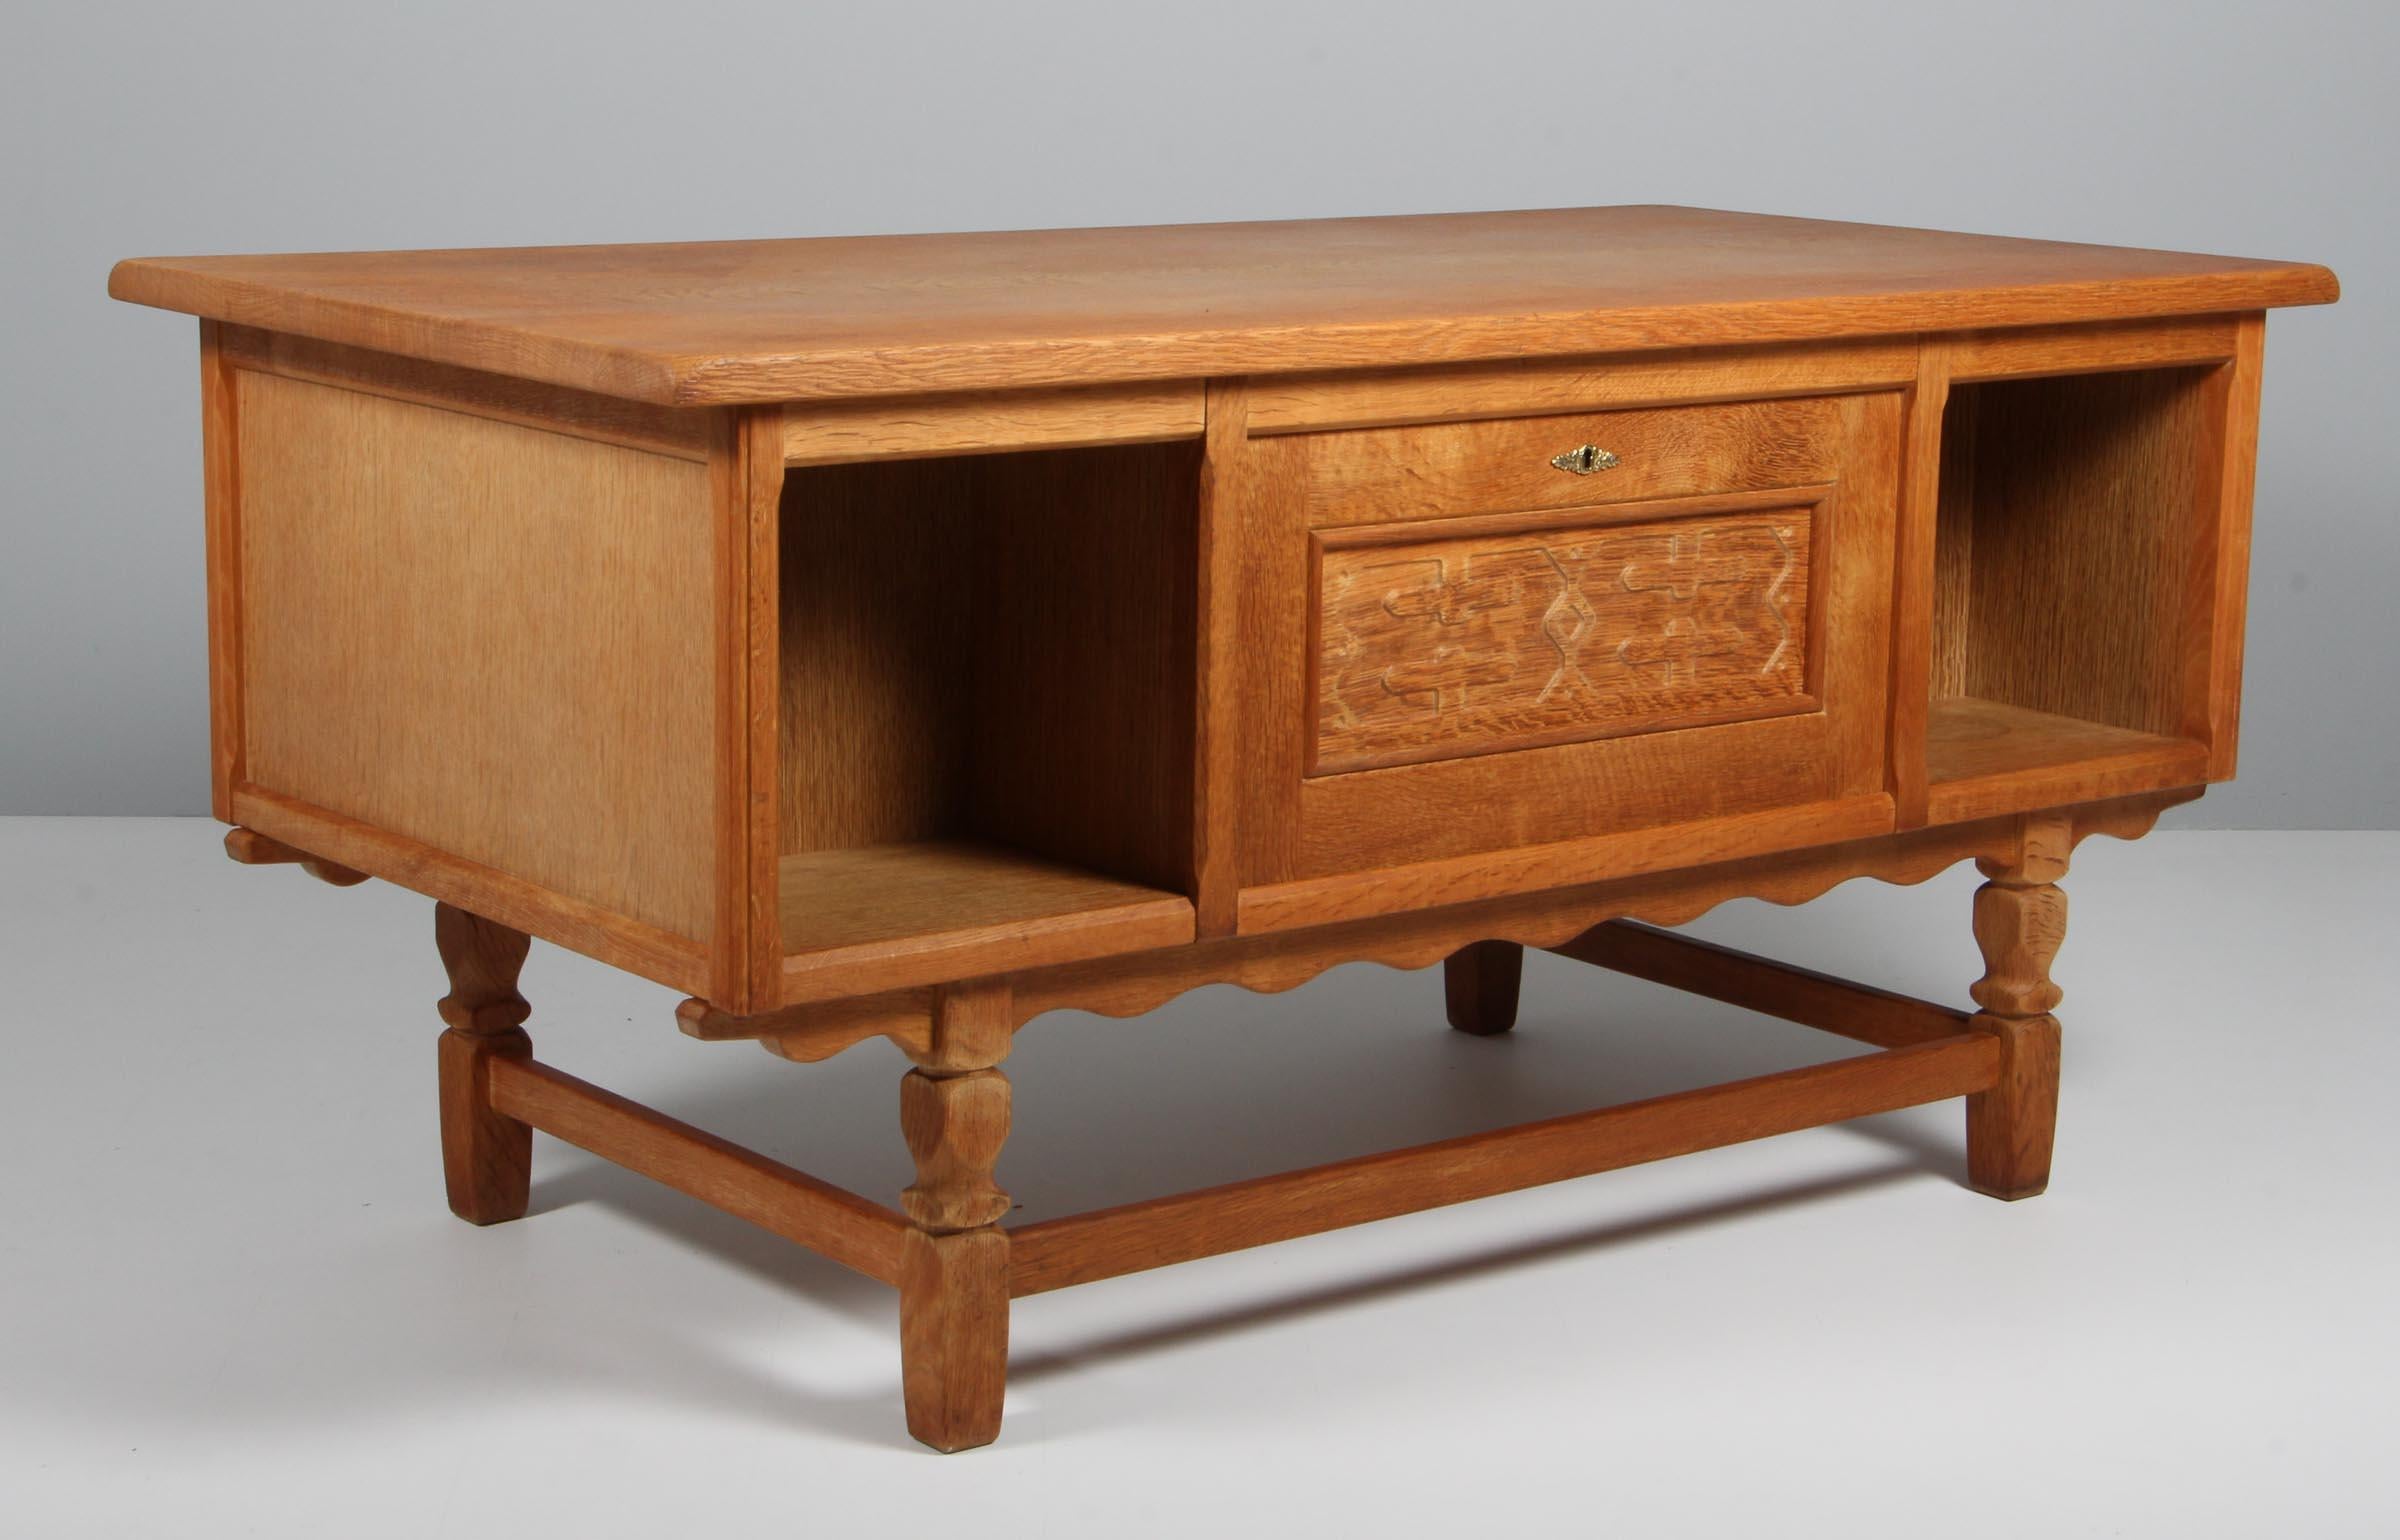 Striking writing desk in oak with drawers. By Henry Kjærnulf. 

Refreshing design with bold Baroque coming together nicely with Mid-Century Modernism.

Made by EG møbler in the 1970s.

